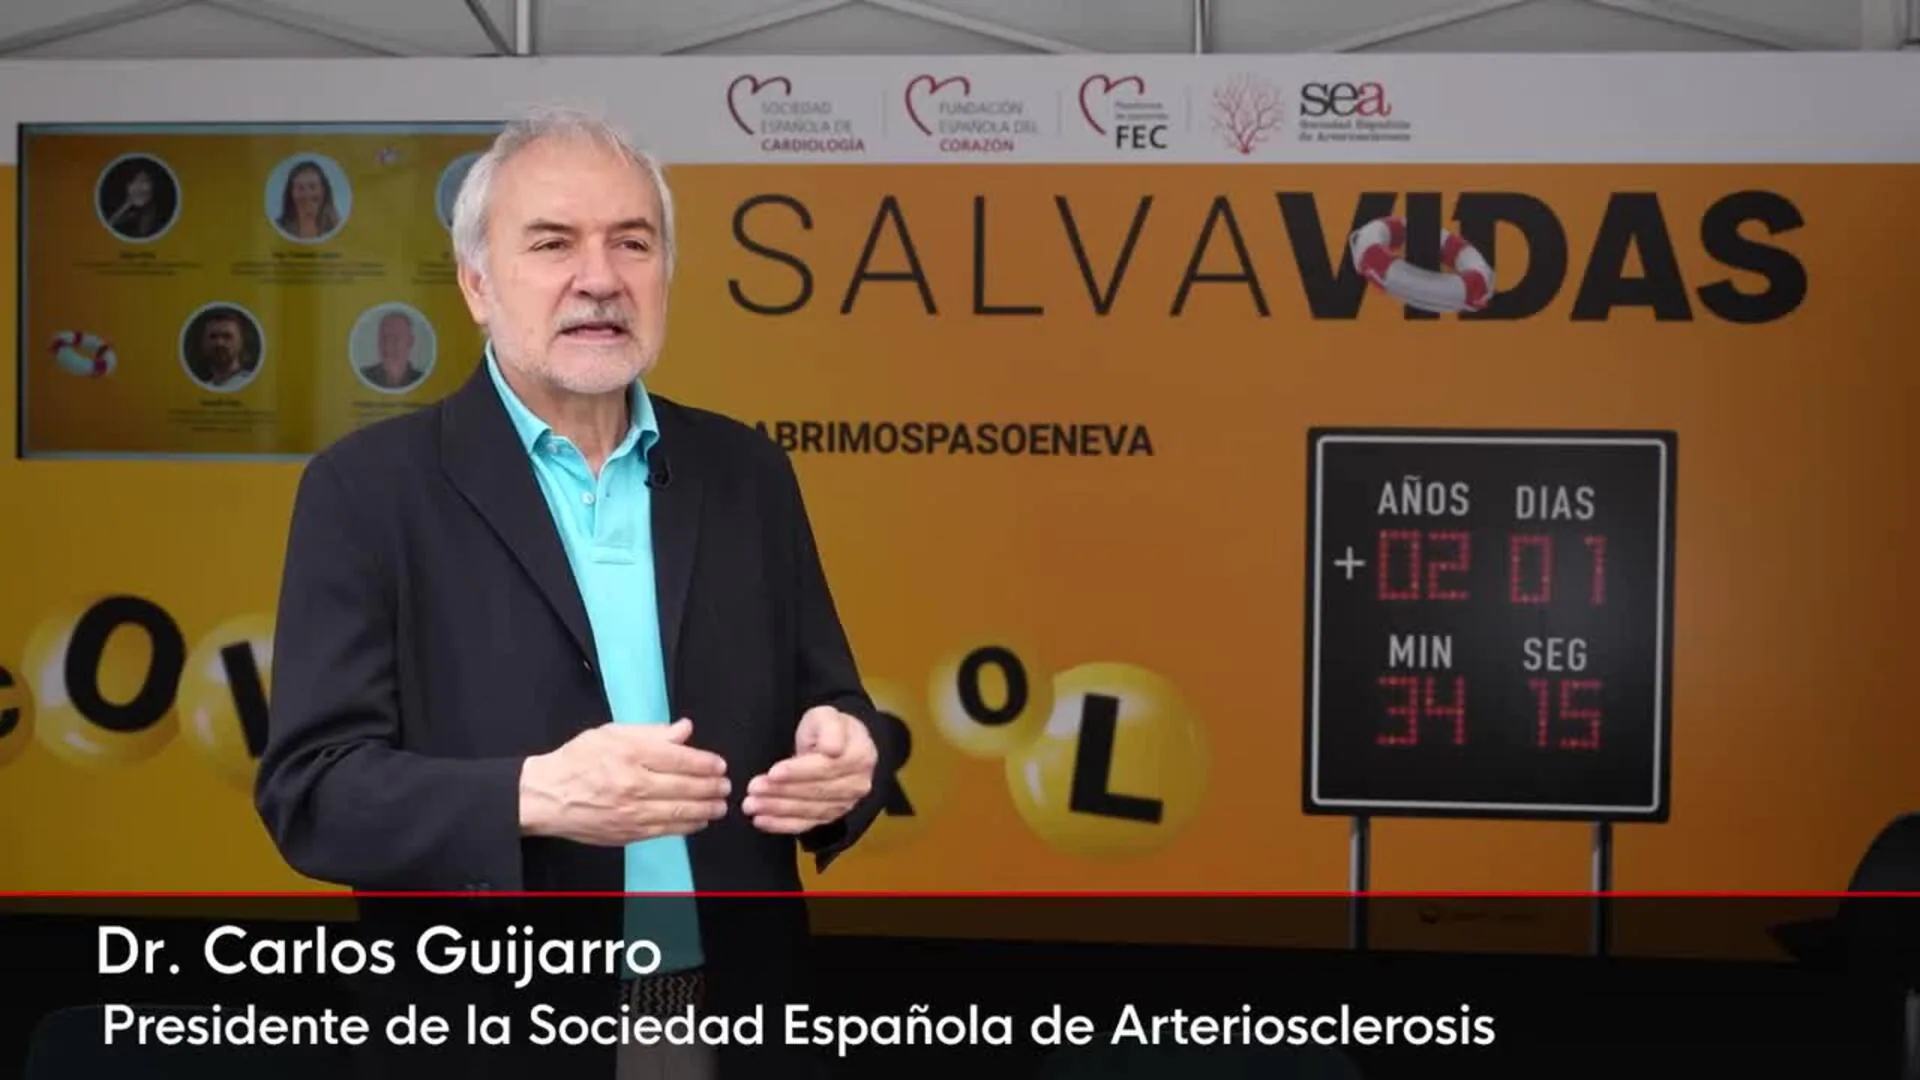 Salvavidas campaign demonstrates the benefits of physical activity for lowering cholesterol levels